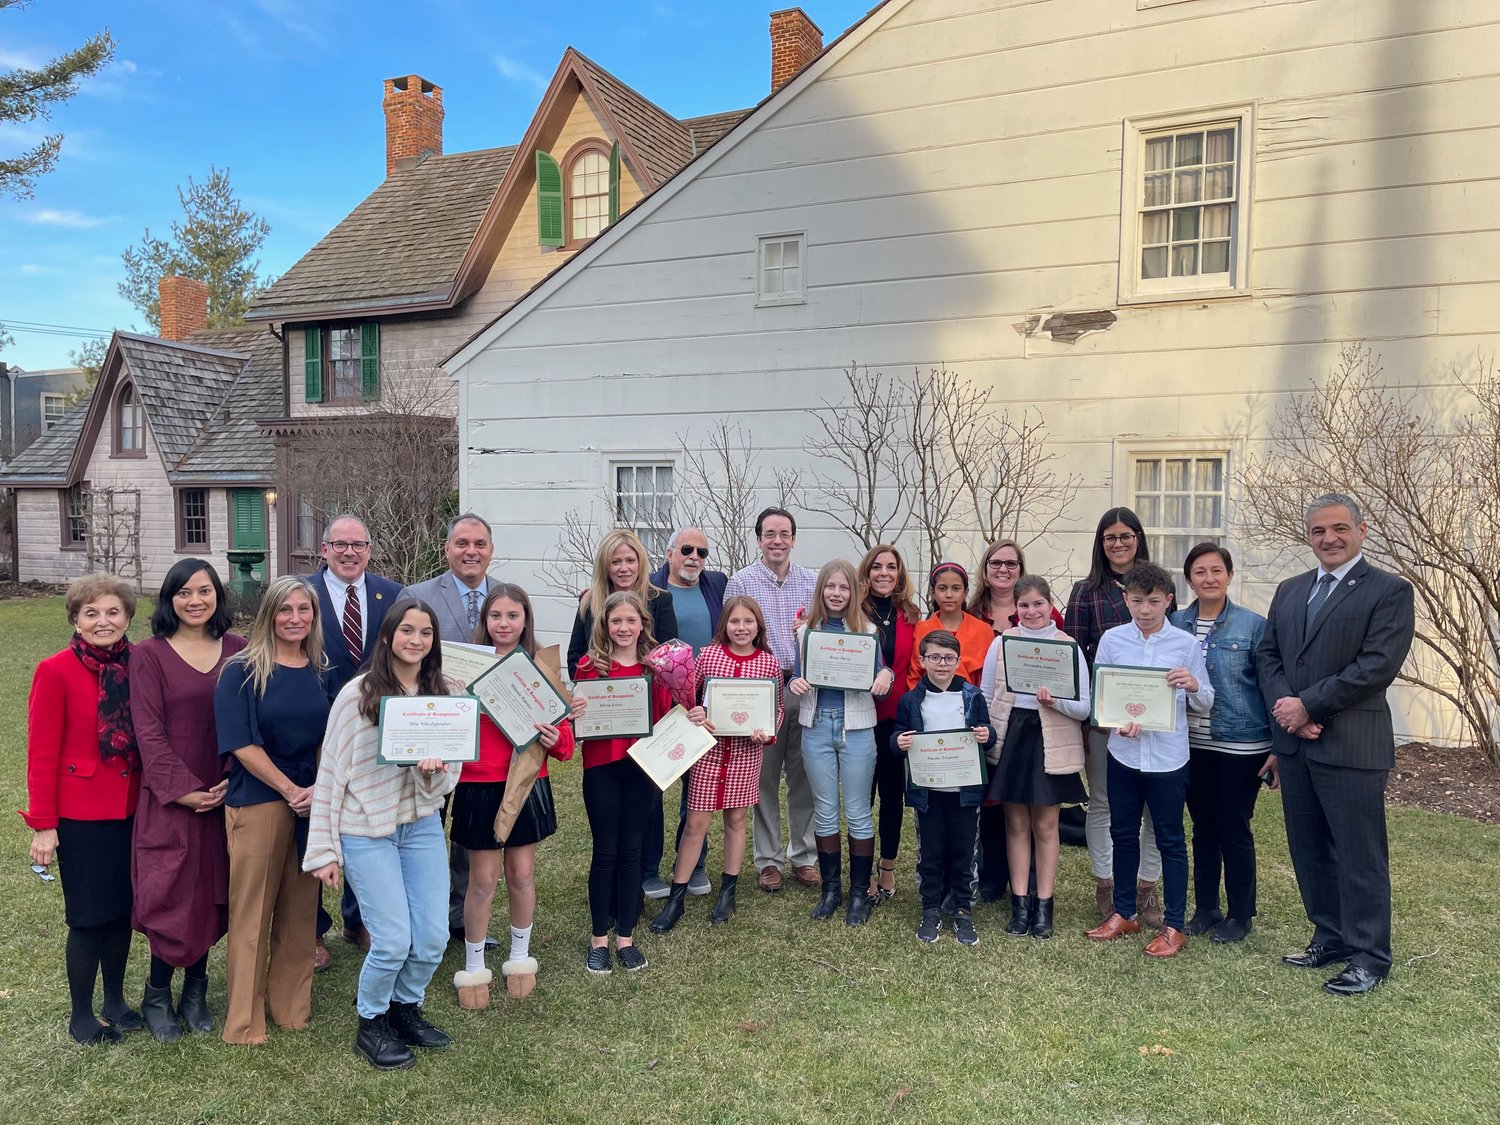 The winners of Raynham Hall’s Valentine’s Day Poetry Contest gathered outside the museum with educators and administrators from the Oyster Bay-East Norwich School District.